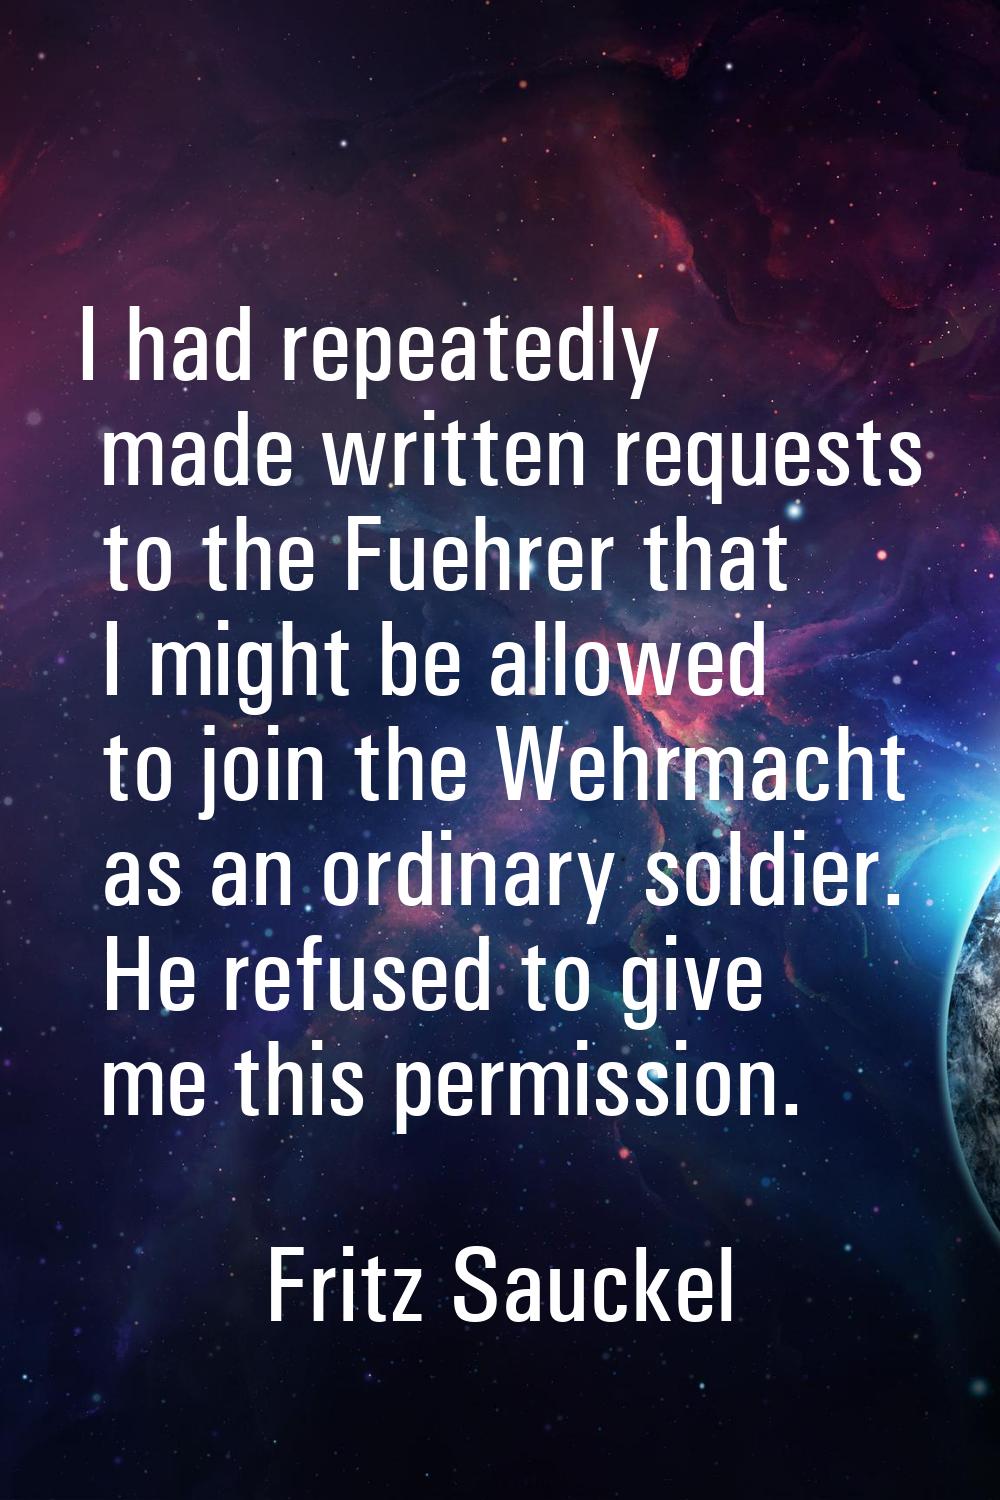 I had repeatedly made written requests to the Fuehrer that I might be allowed to join the Wehrmacht